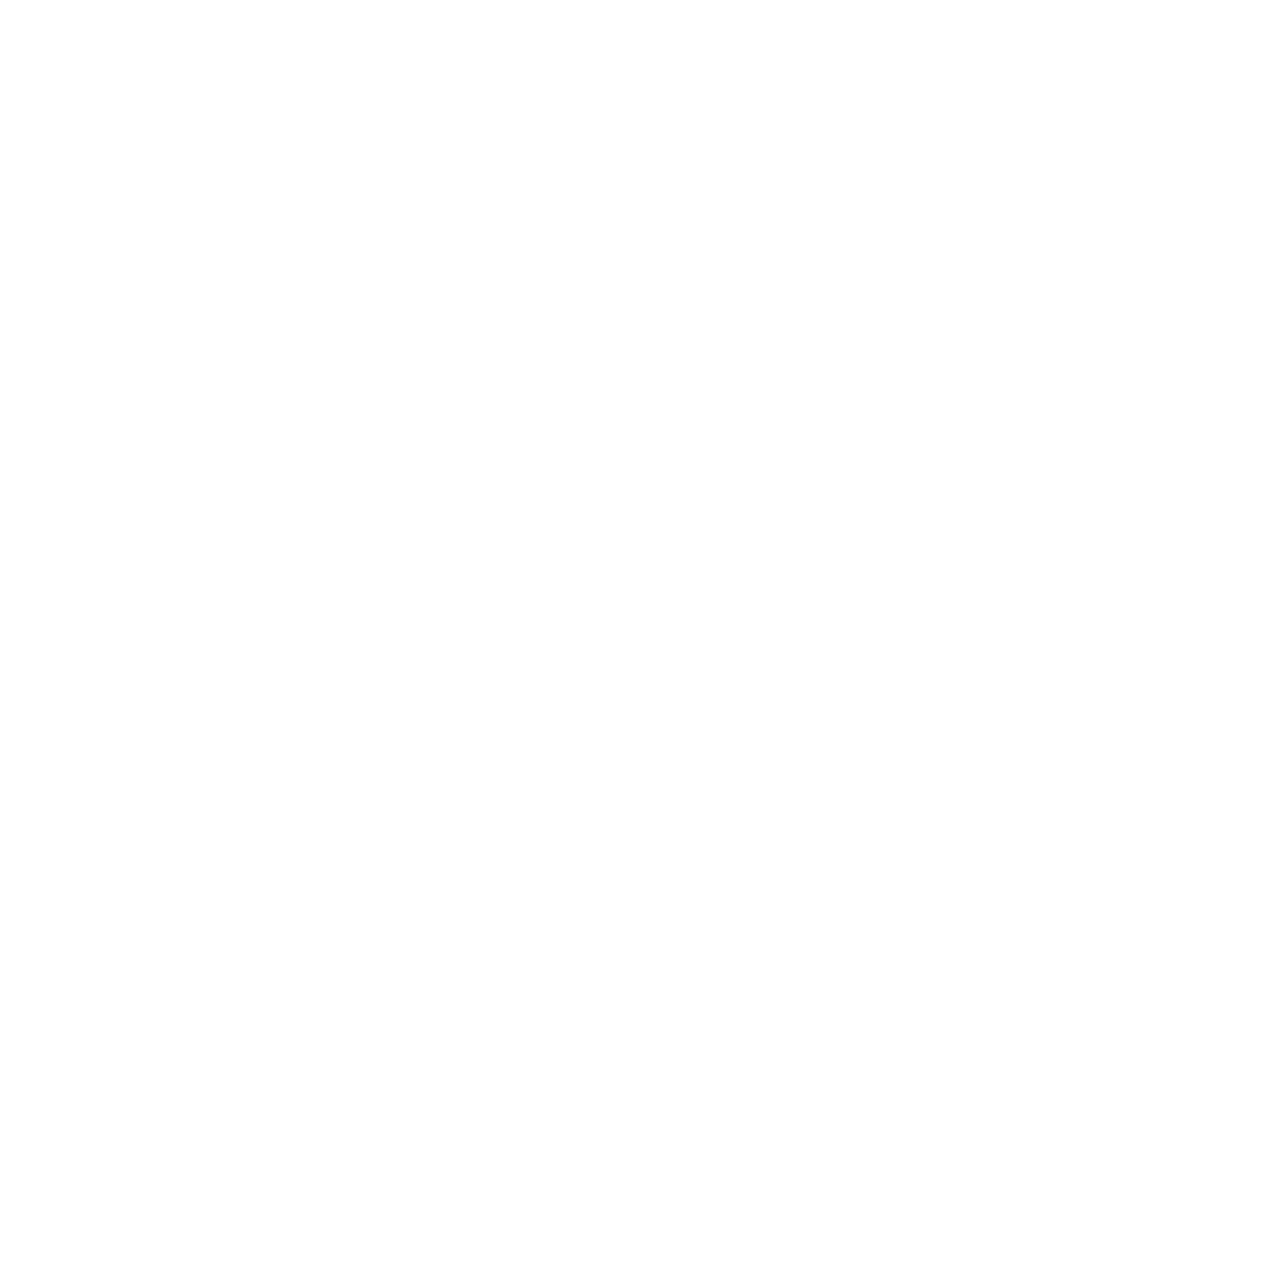 Frosty and winter weather icon